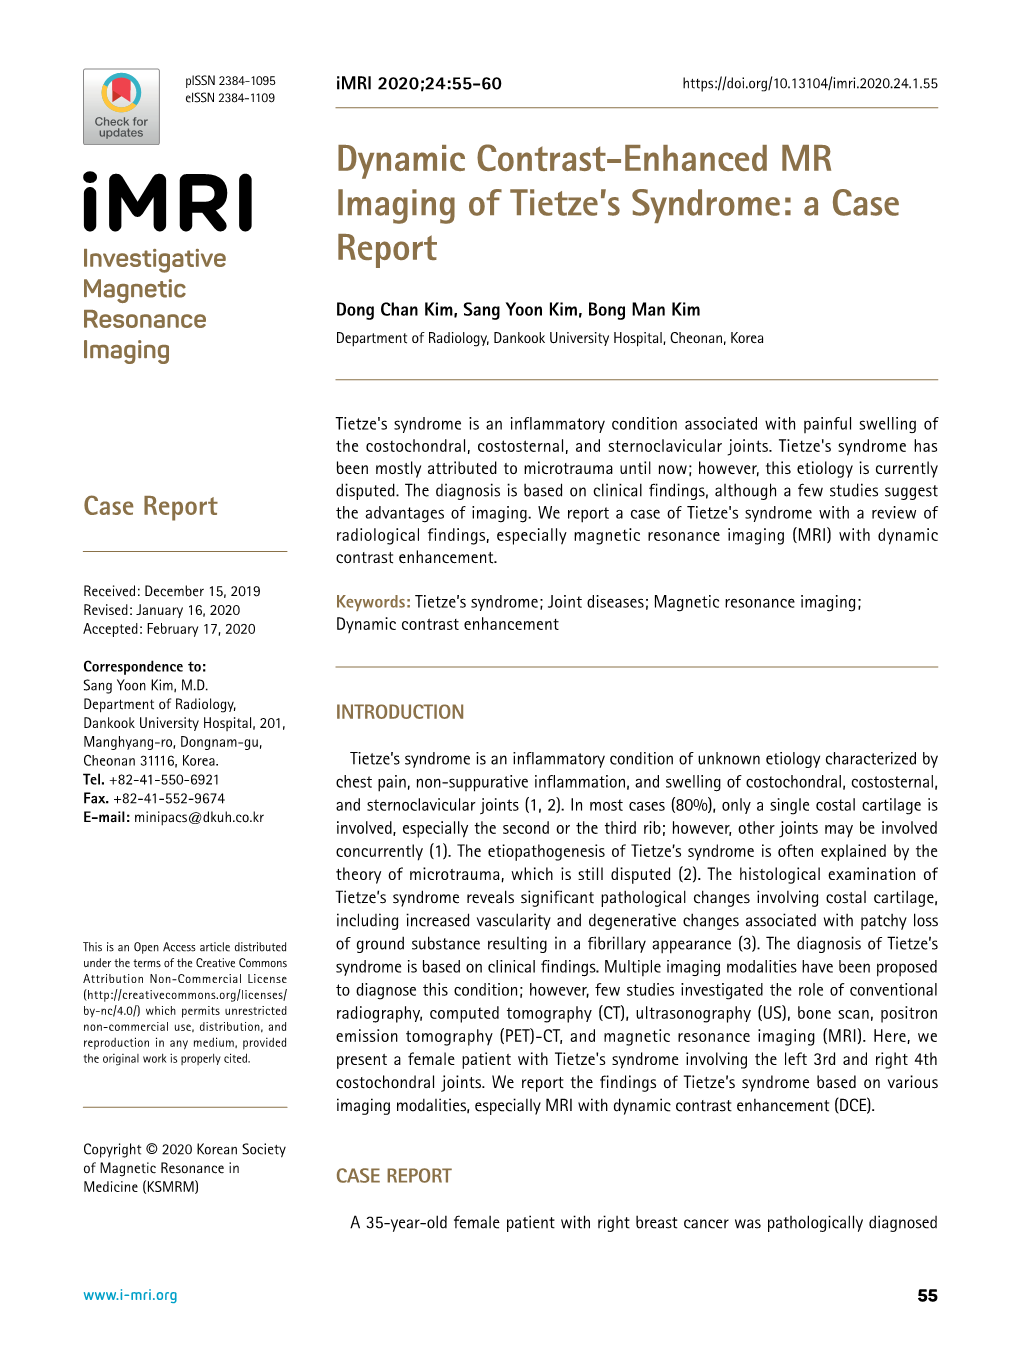 Dynamic Contrast-Enhanced MR Imaging of Tietze's Syndrome